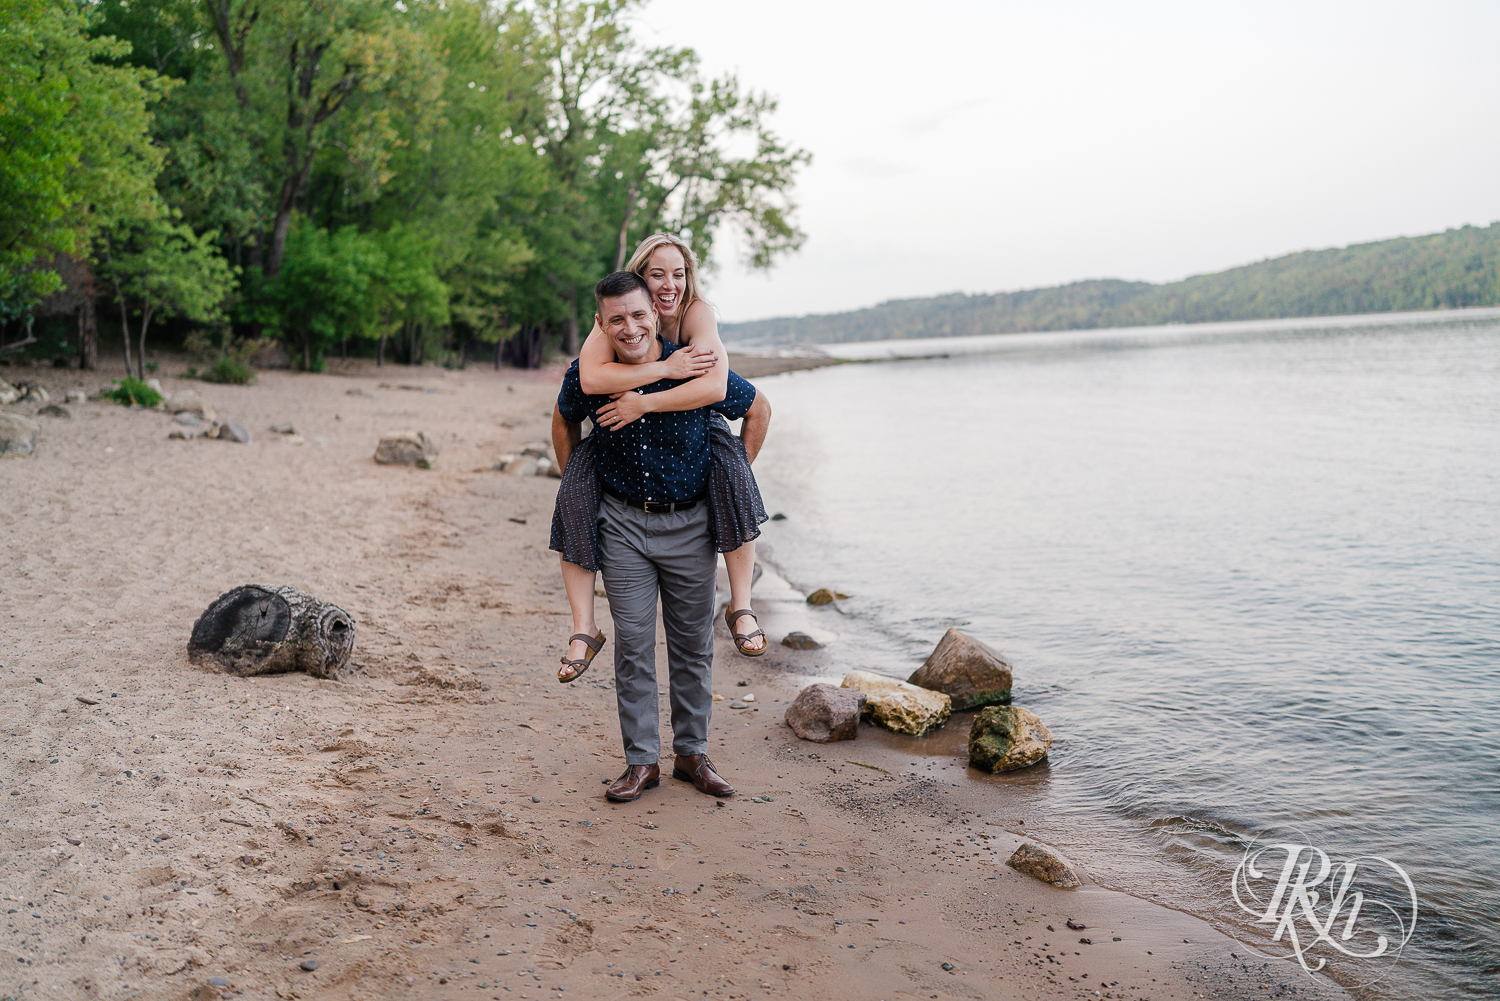 Man carries blonde woman in blue dress on his back on beach at Afton State Park in Hastings, Minnesota.